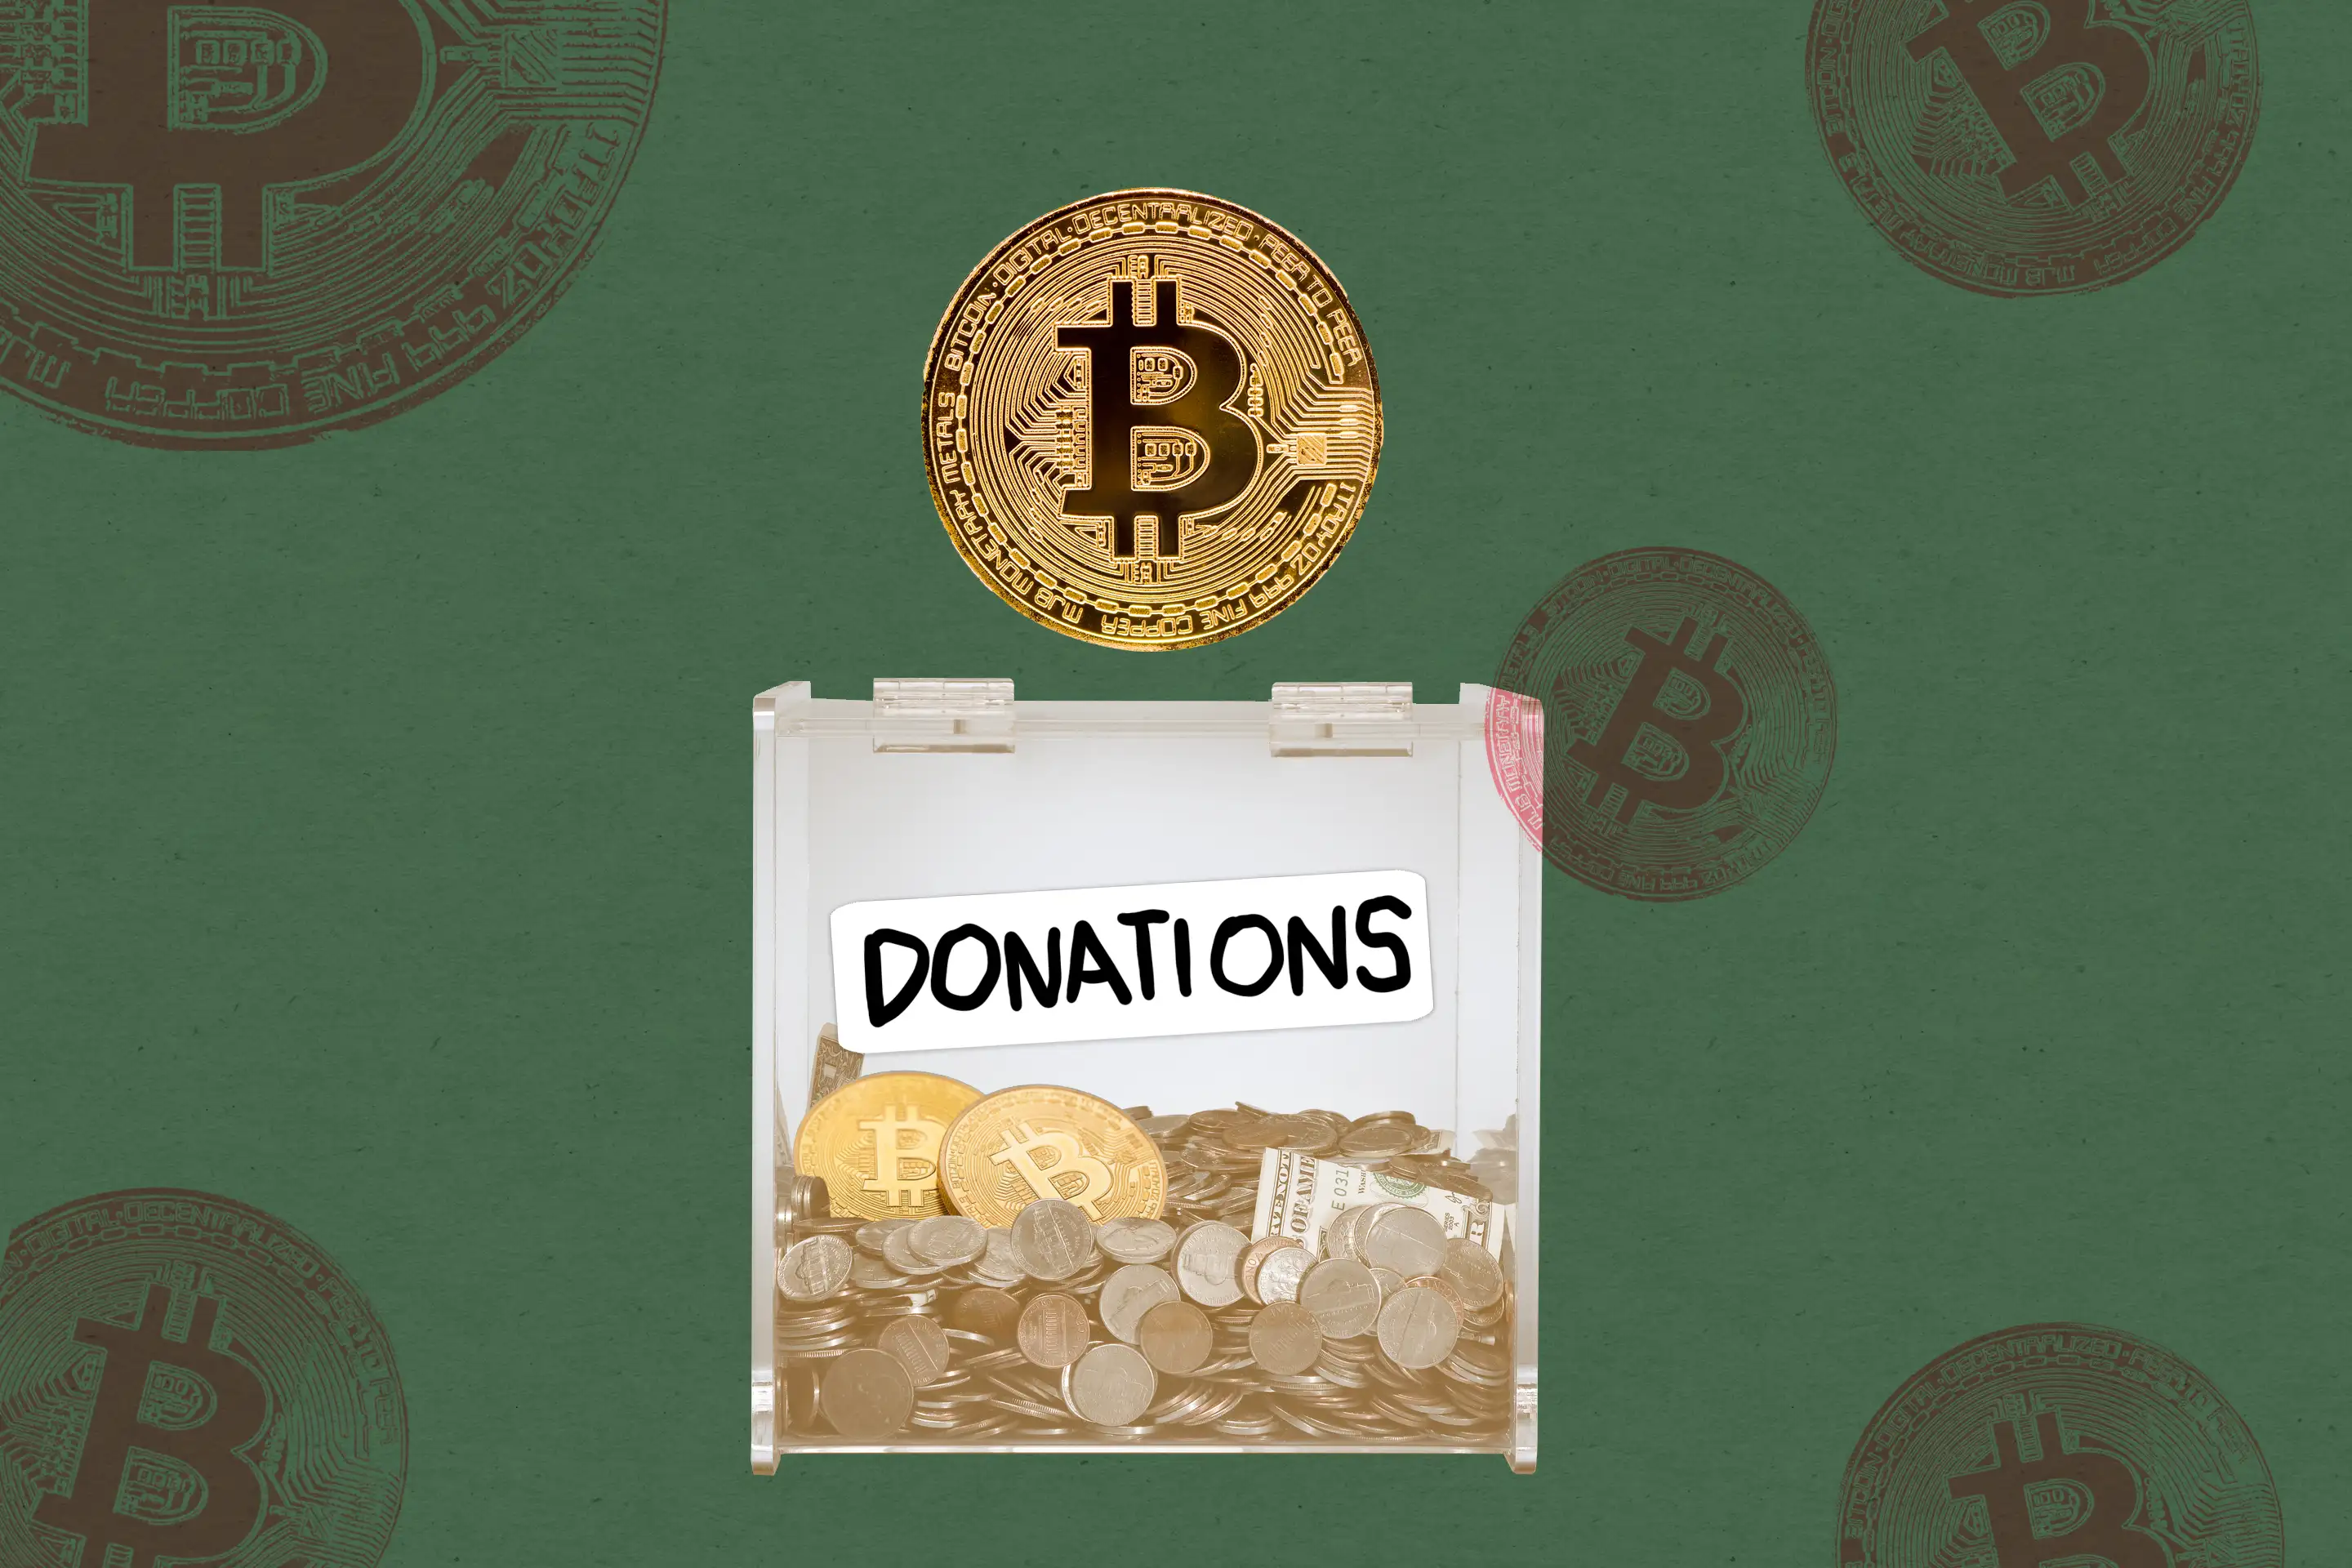 Donate Cryptocurrency | Turing Trust